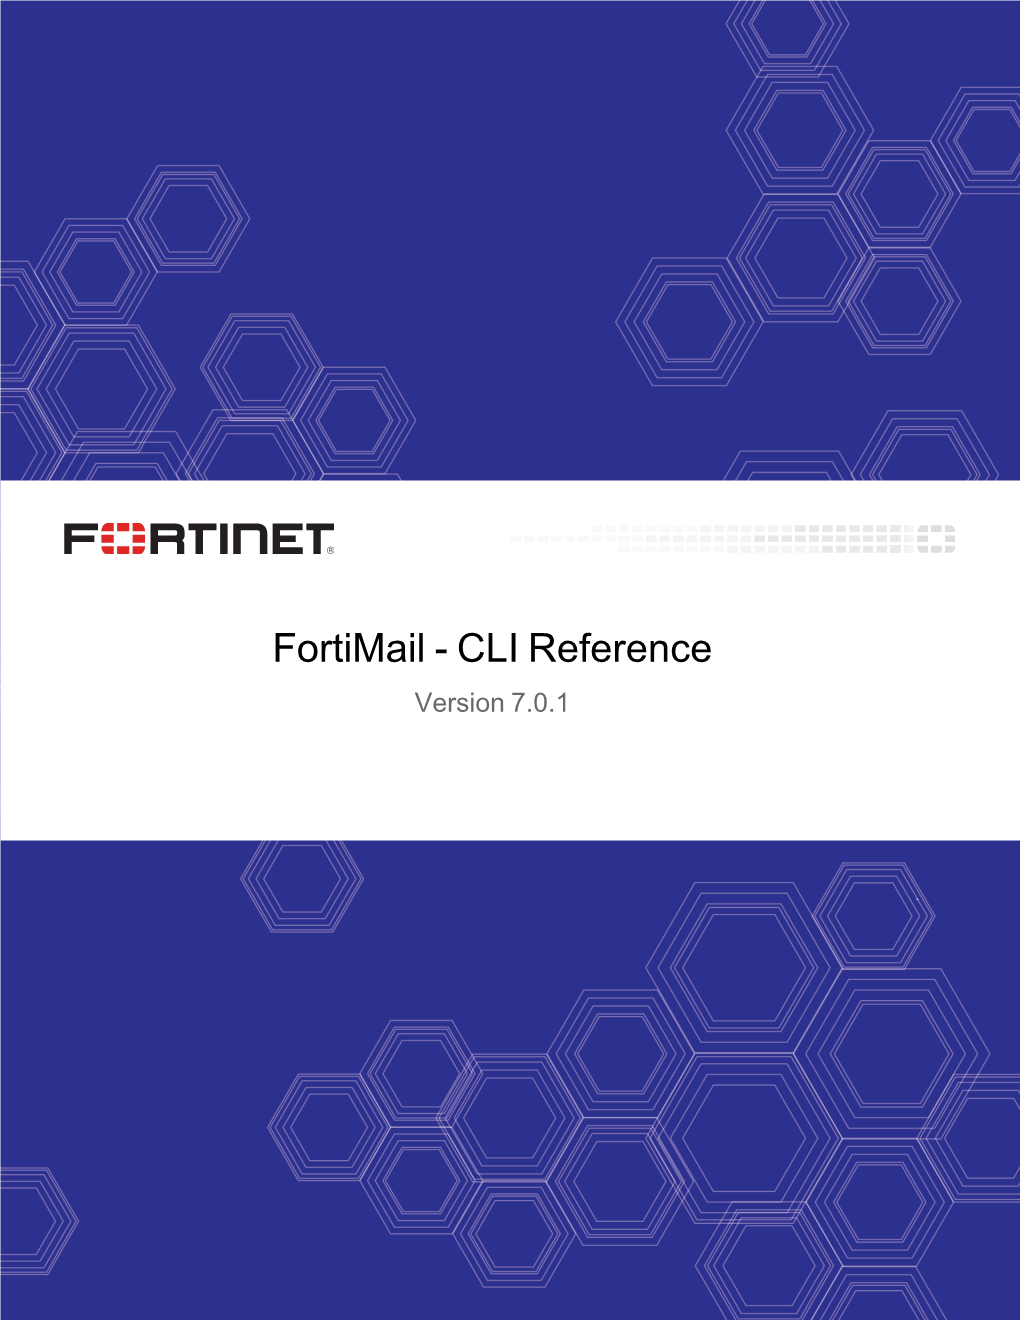 Fortimail CLI Reference